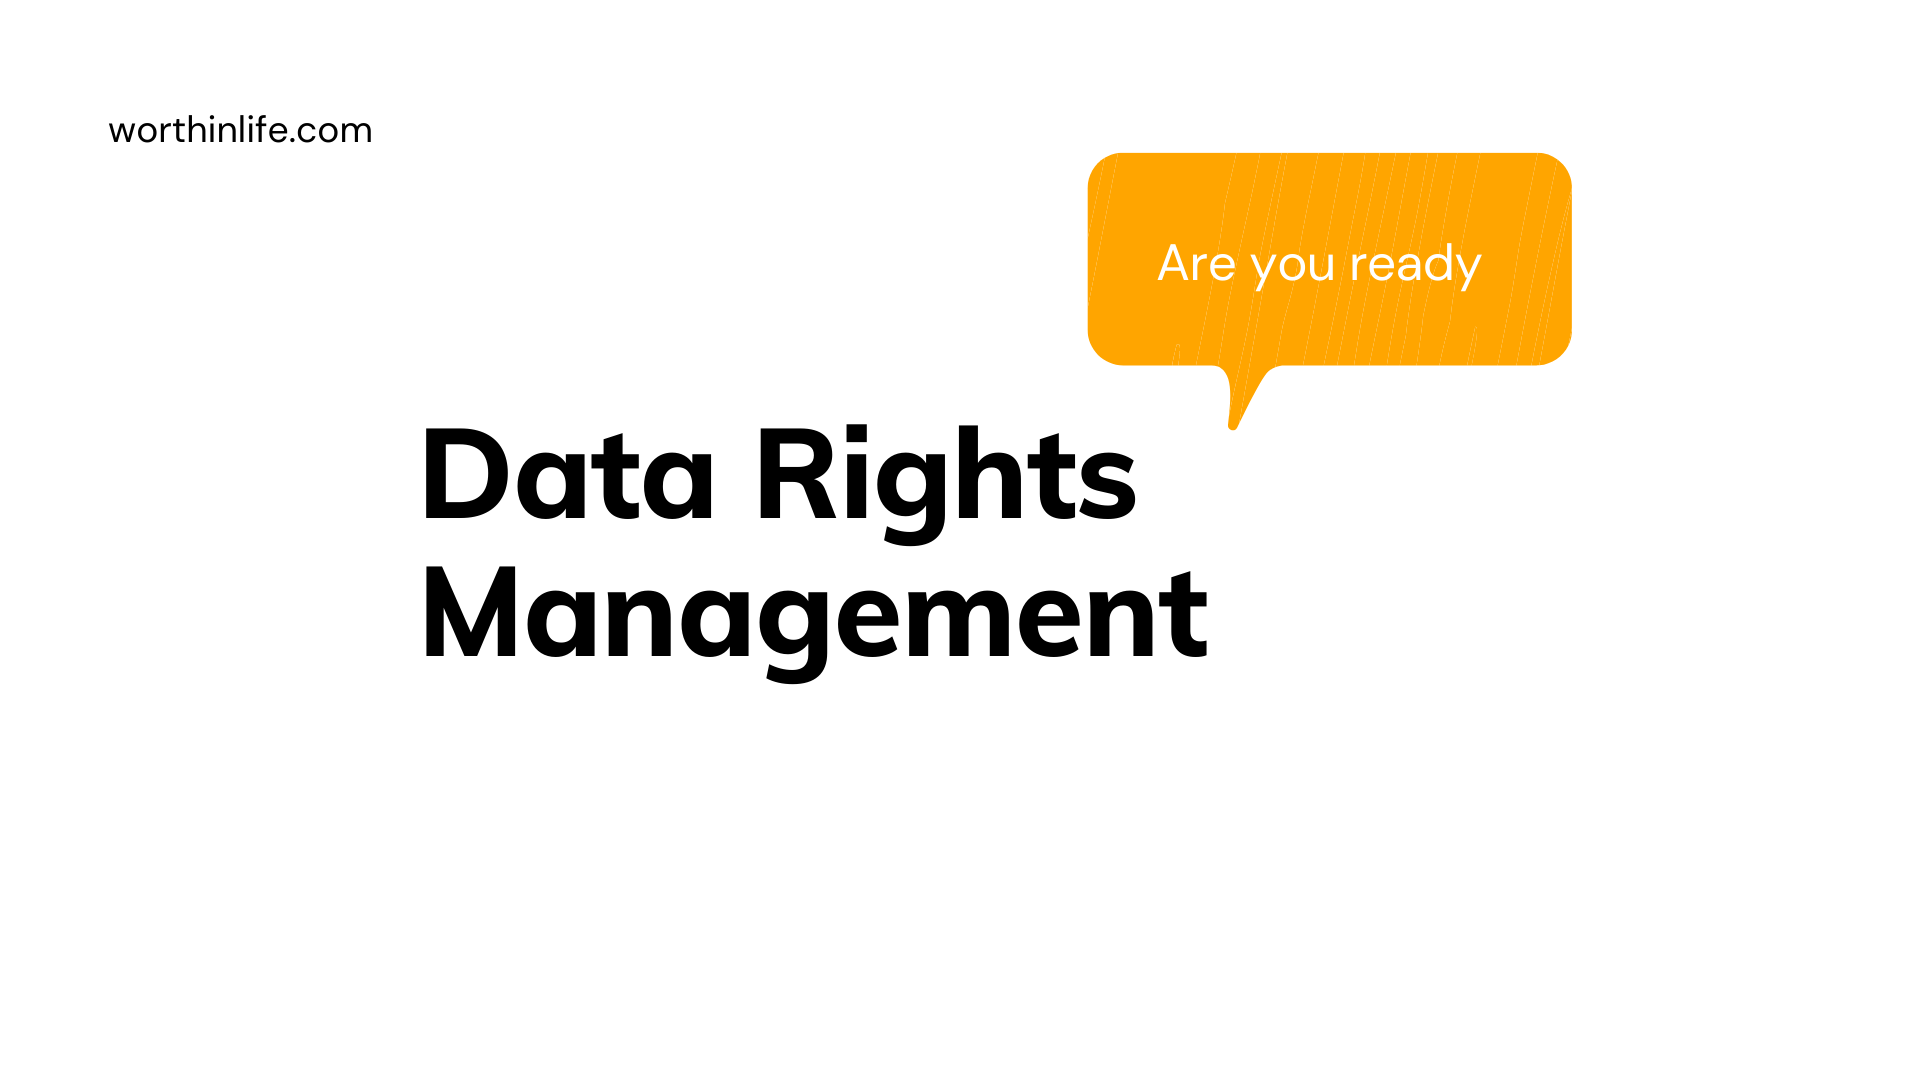 Data Rights Management